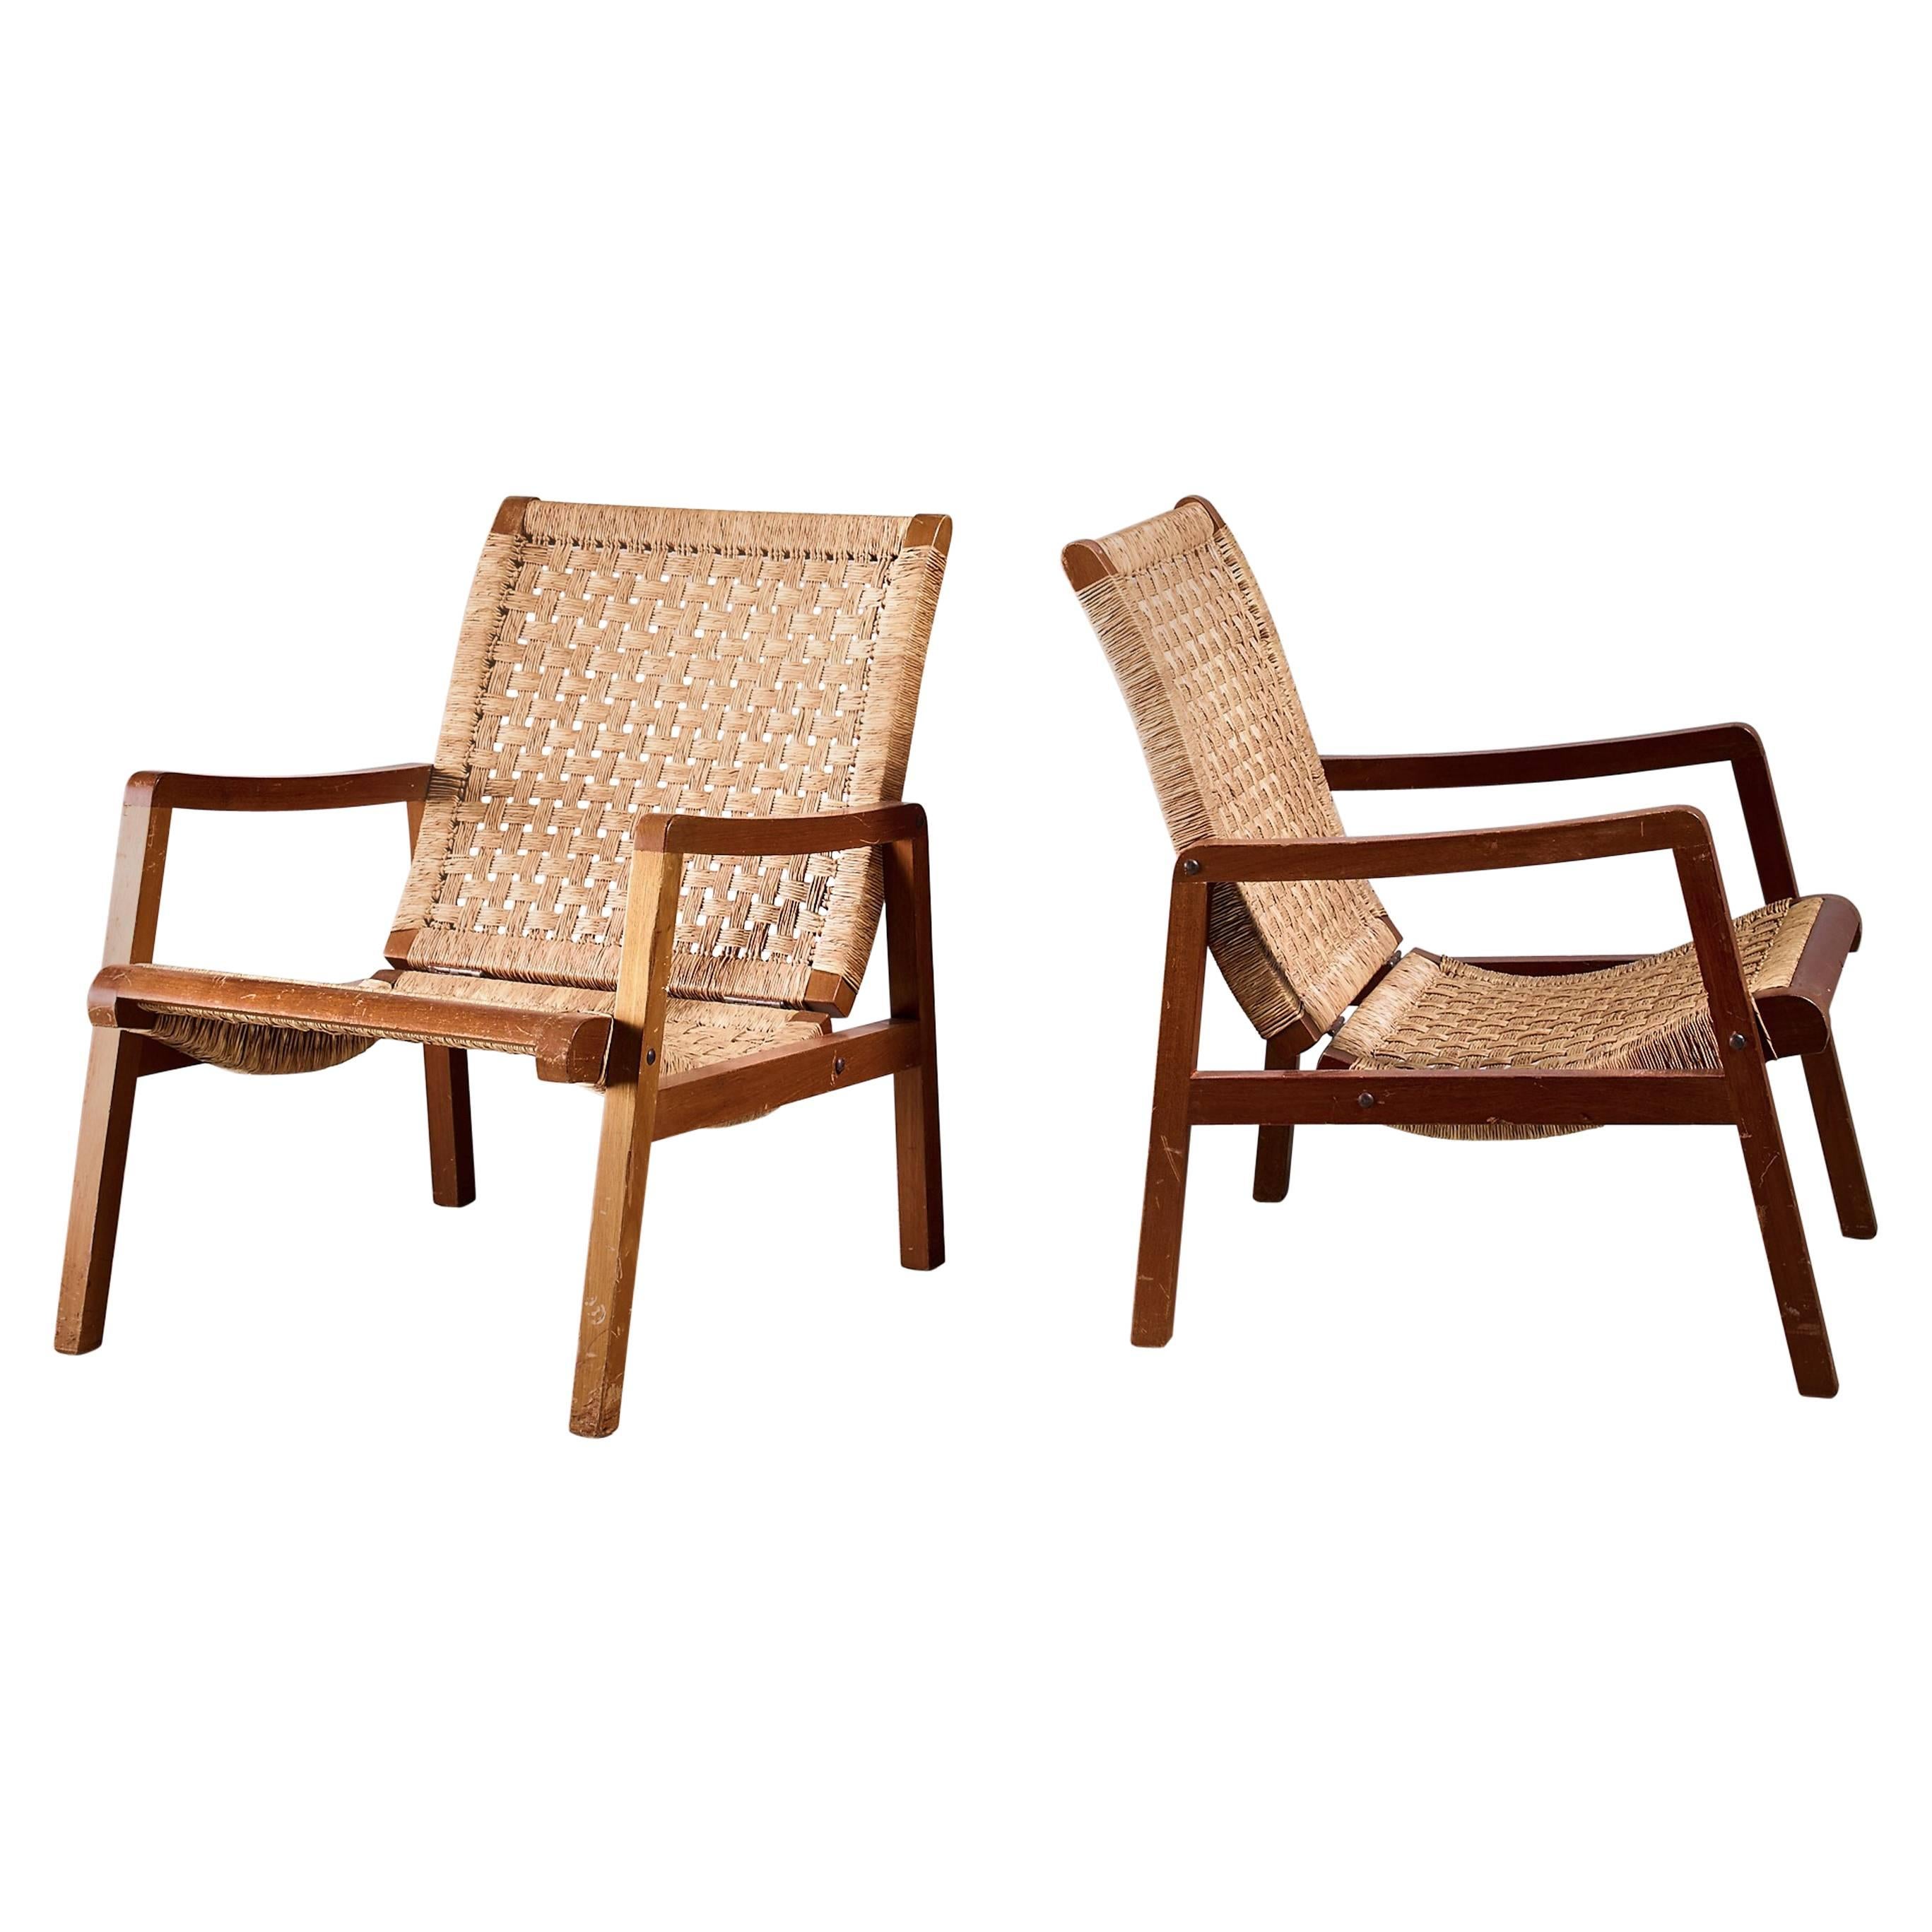 Pair of Mexican Wood and Cane Armchairs, 1950s